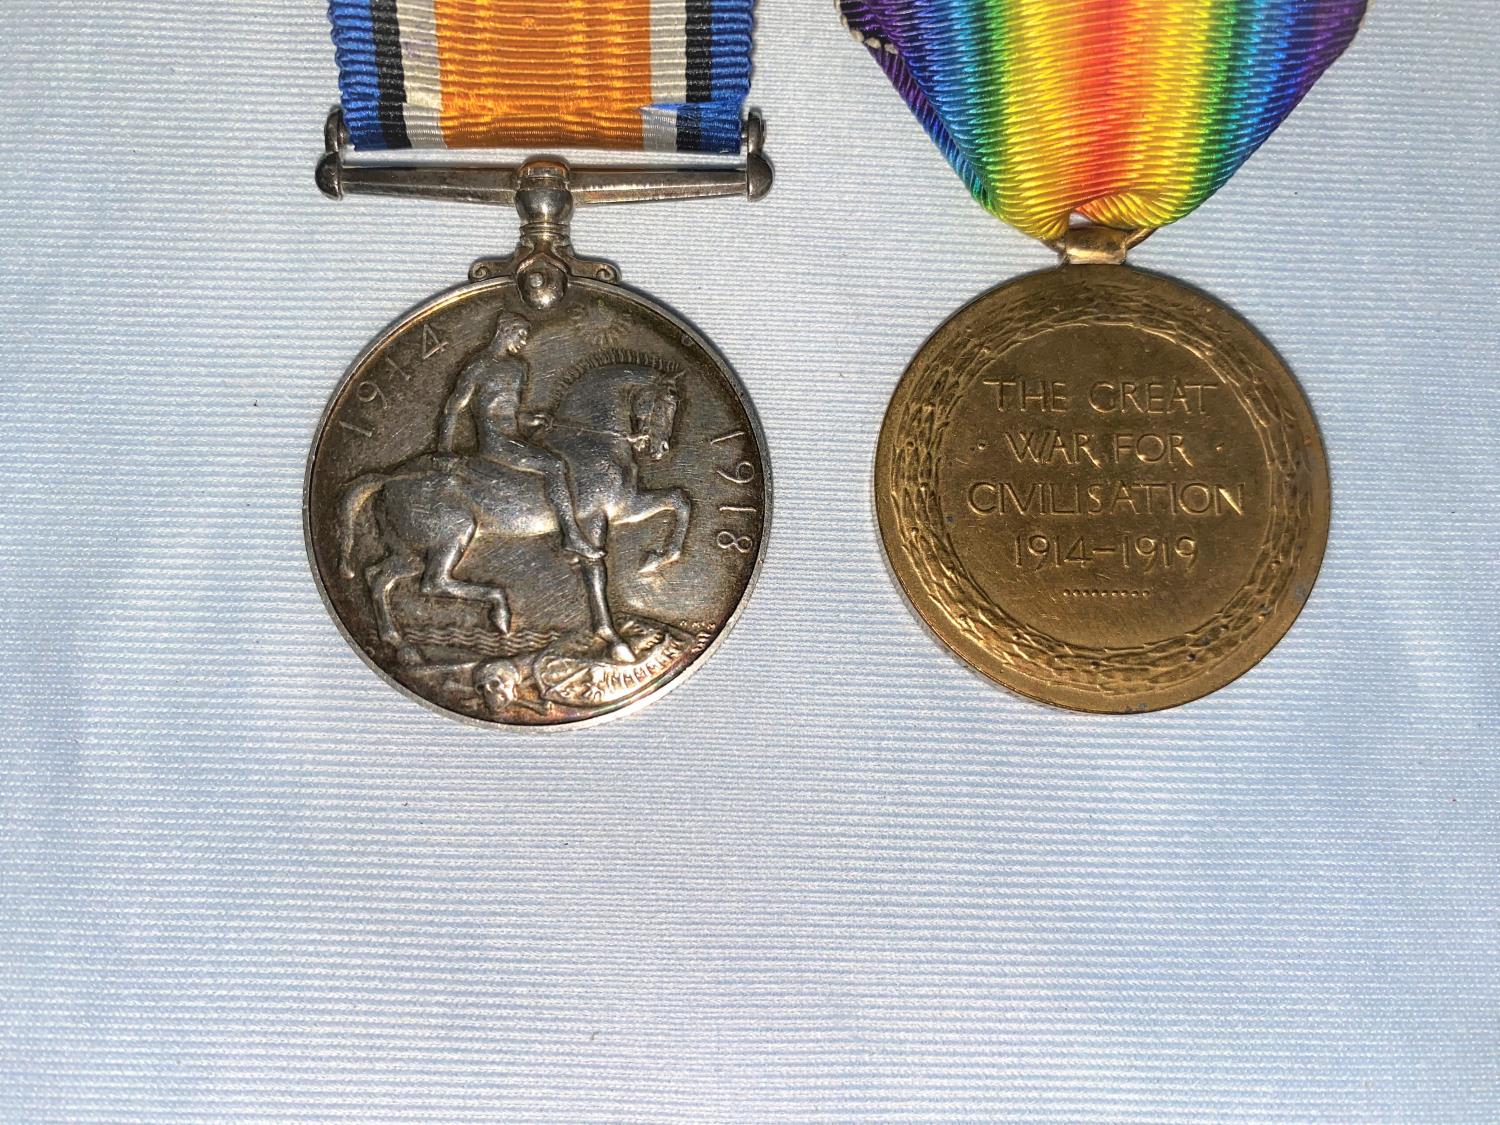 WWI medals in a frame, 480661 Cpl G H Carter R E - Image 2 of 5